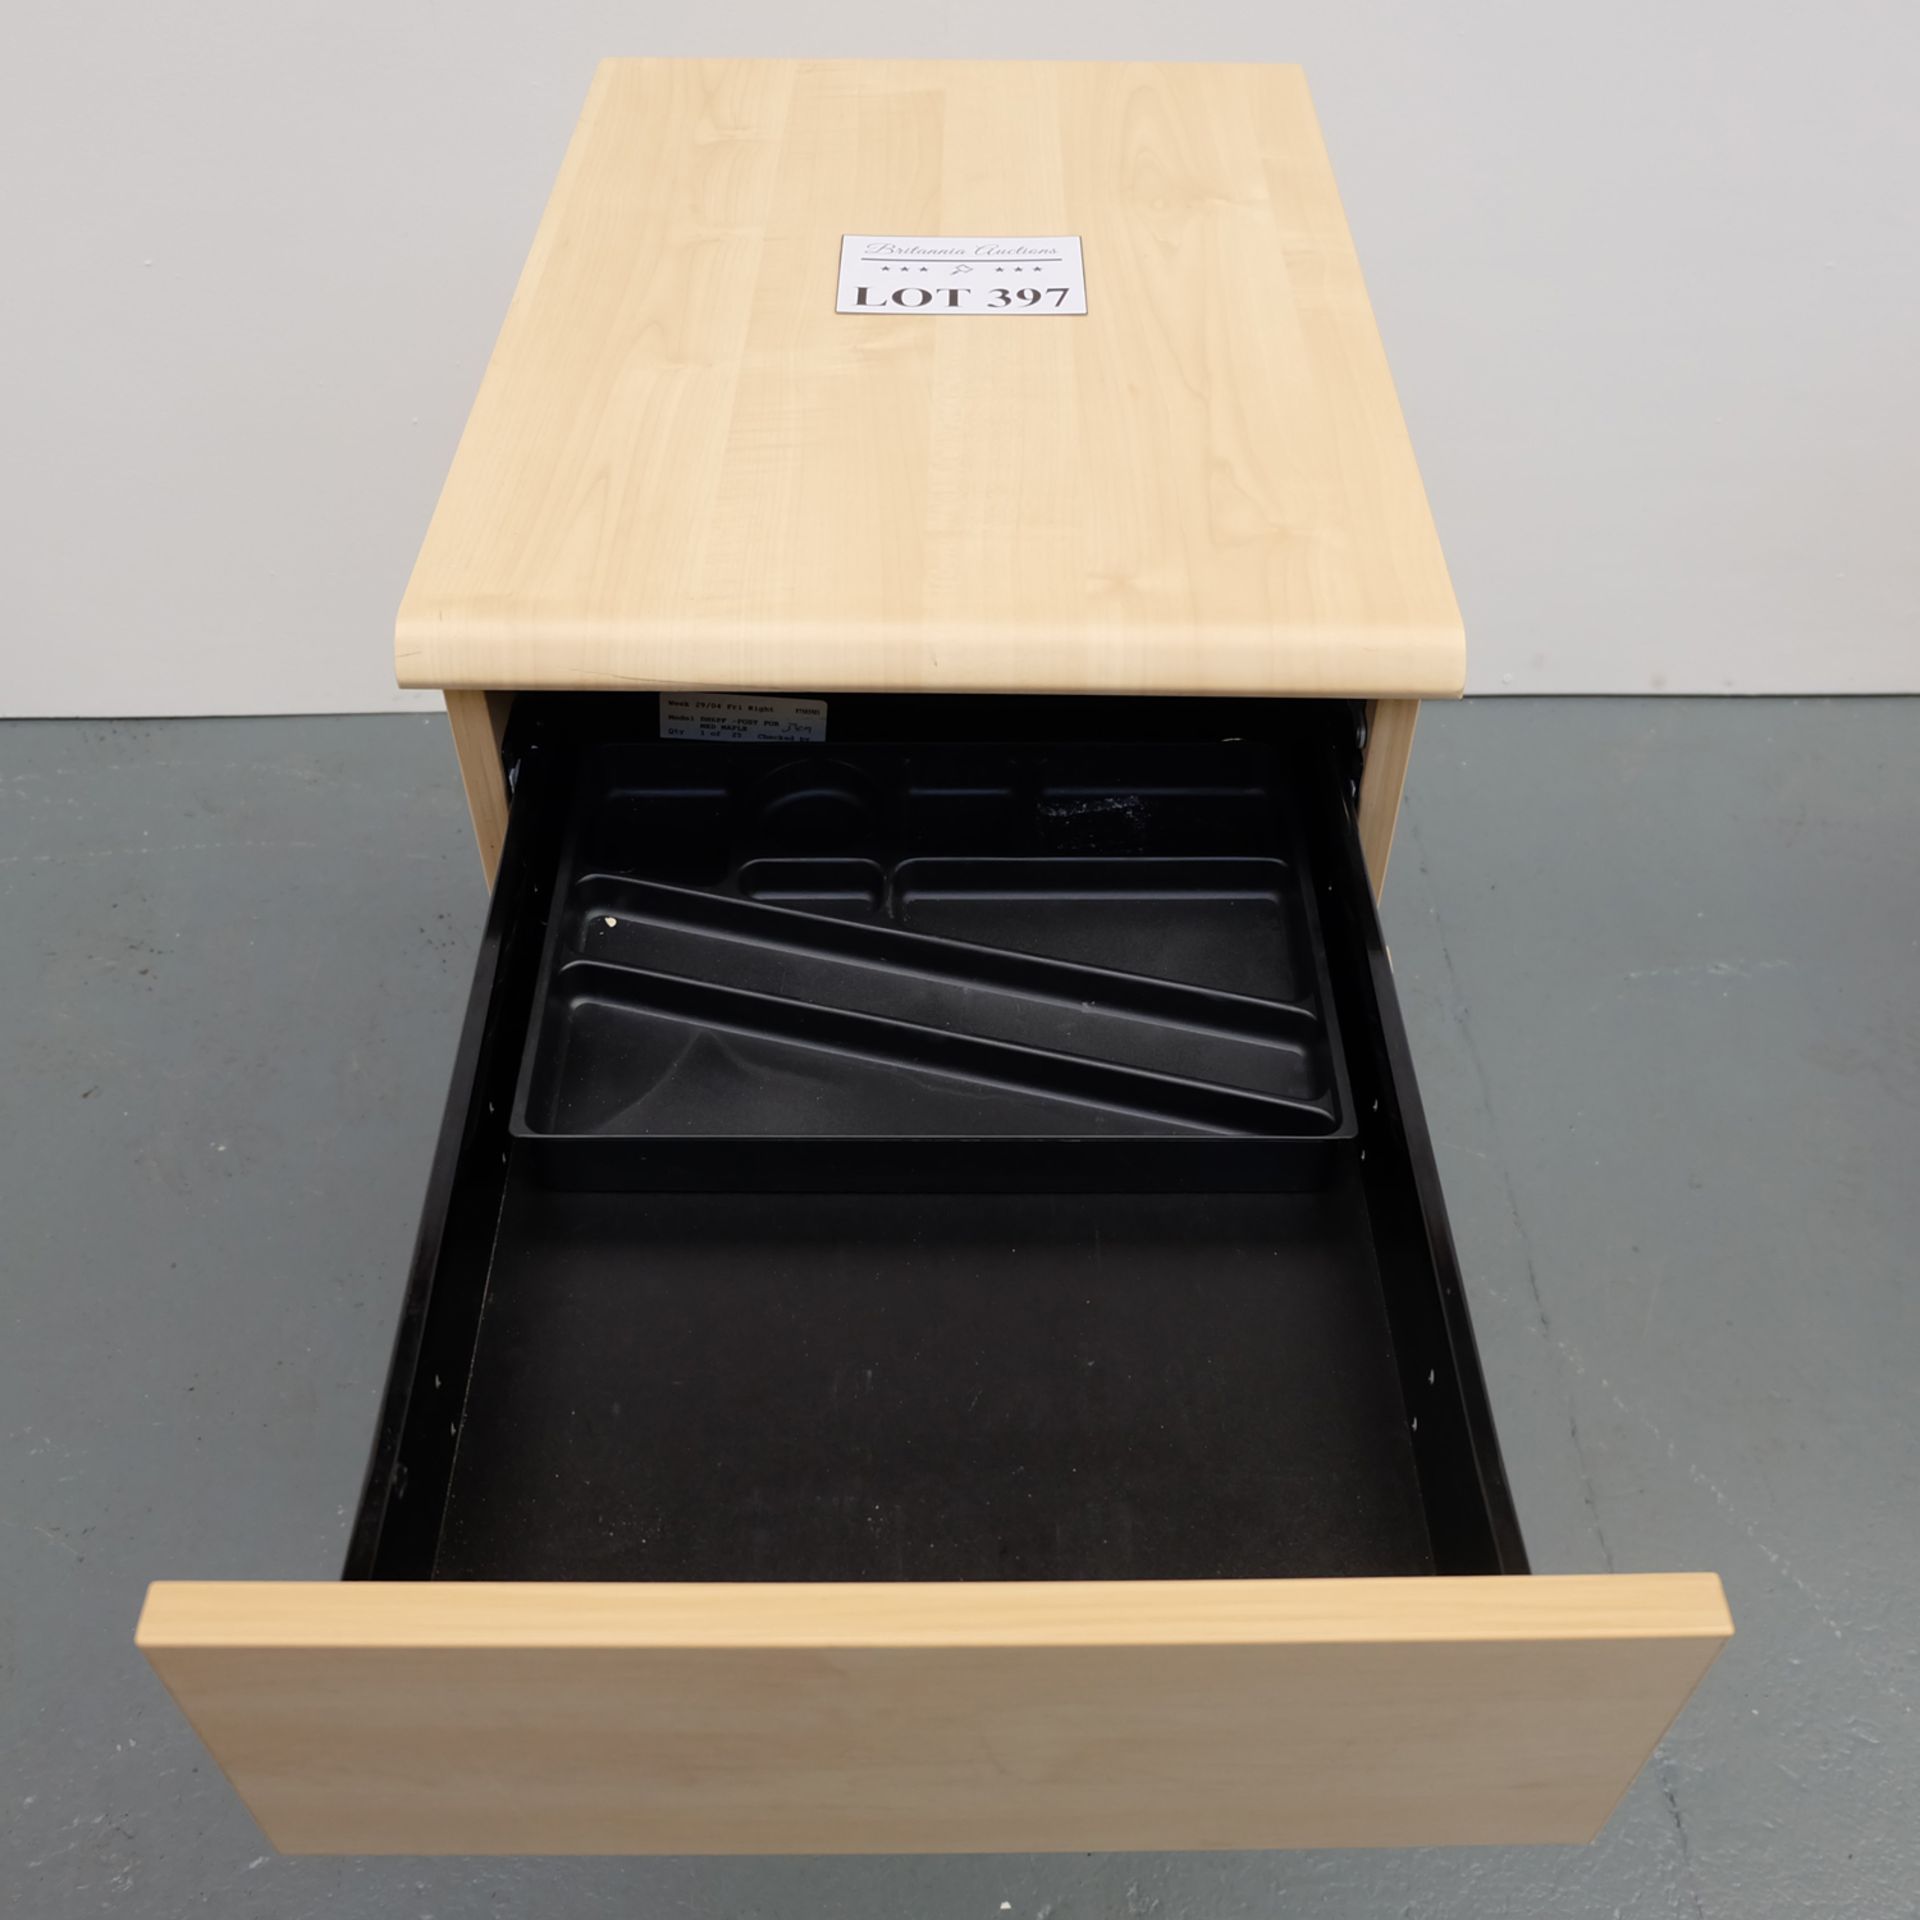 Set of Office Drawers. Dimensions 430mm x 600mm x 730mm High Approx. - Image 4 of 6